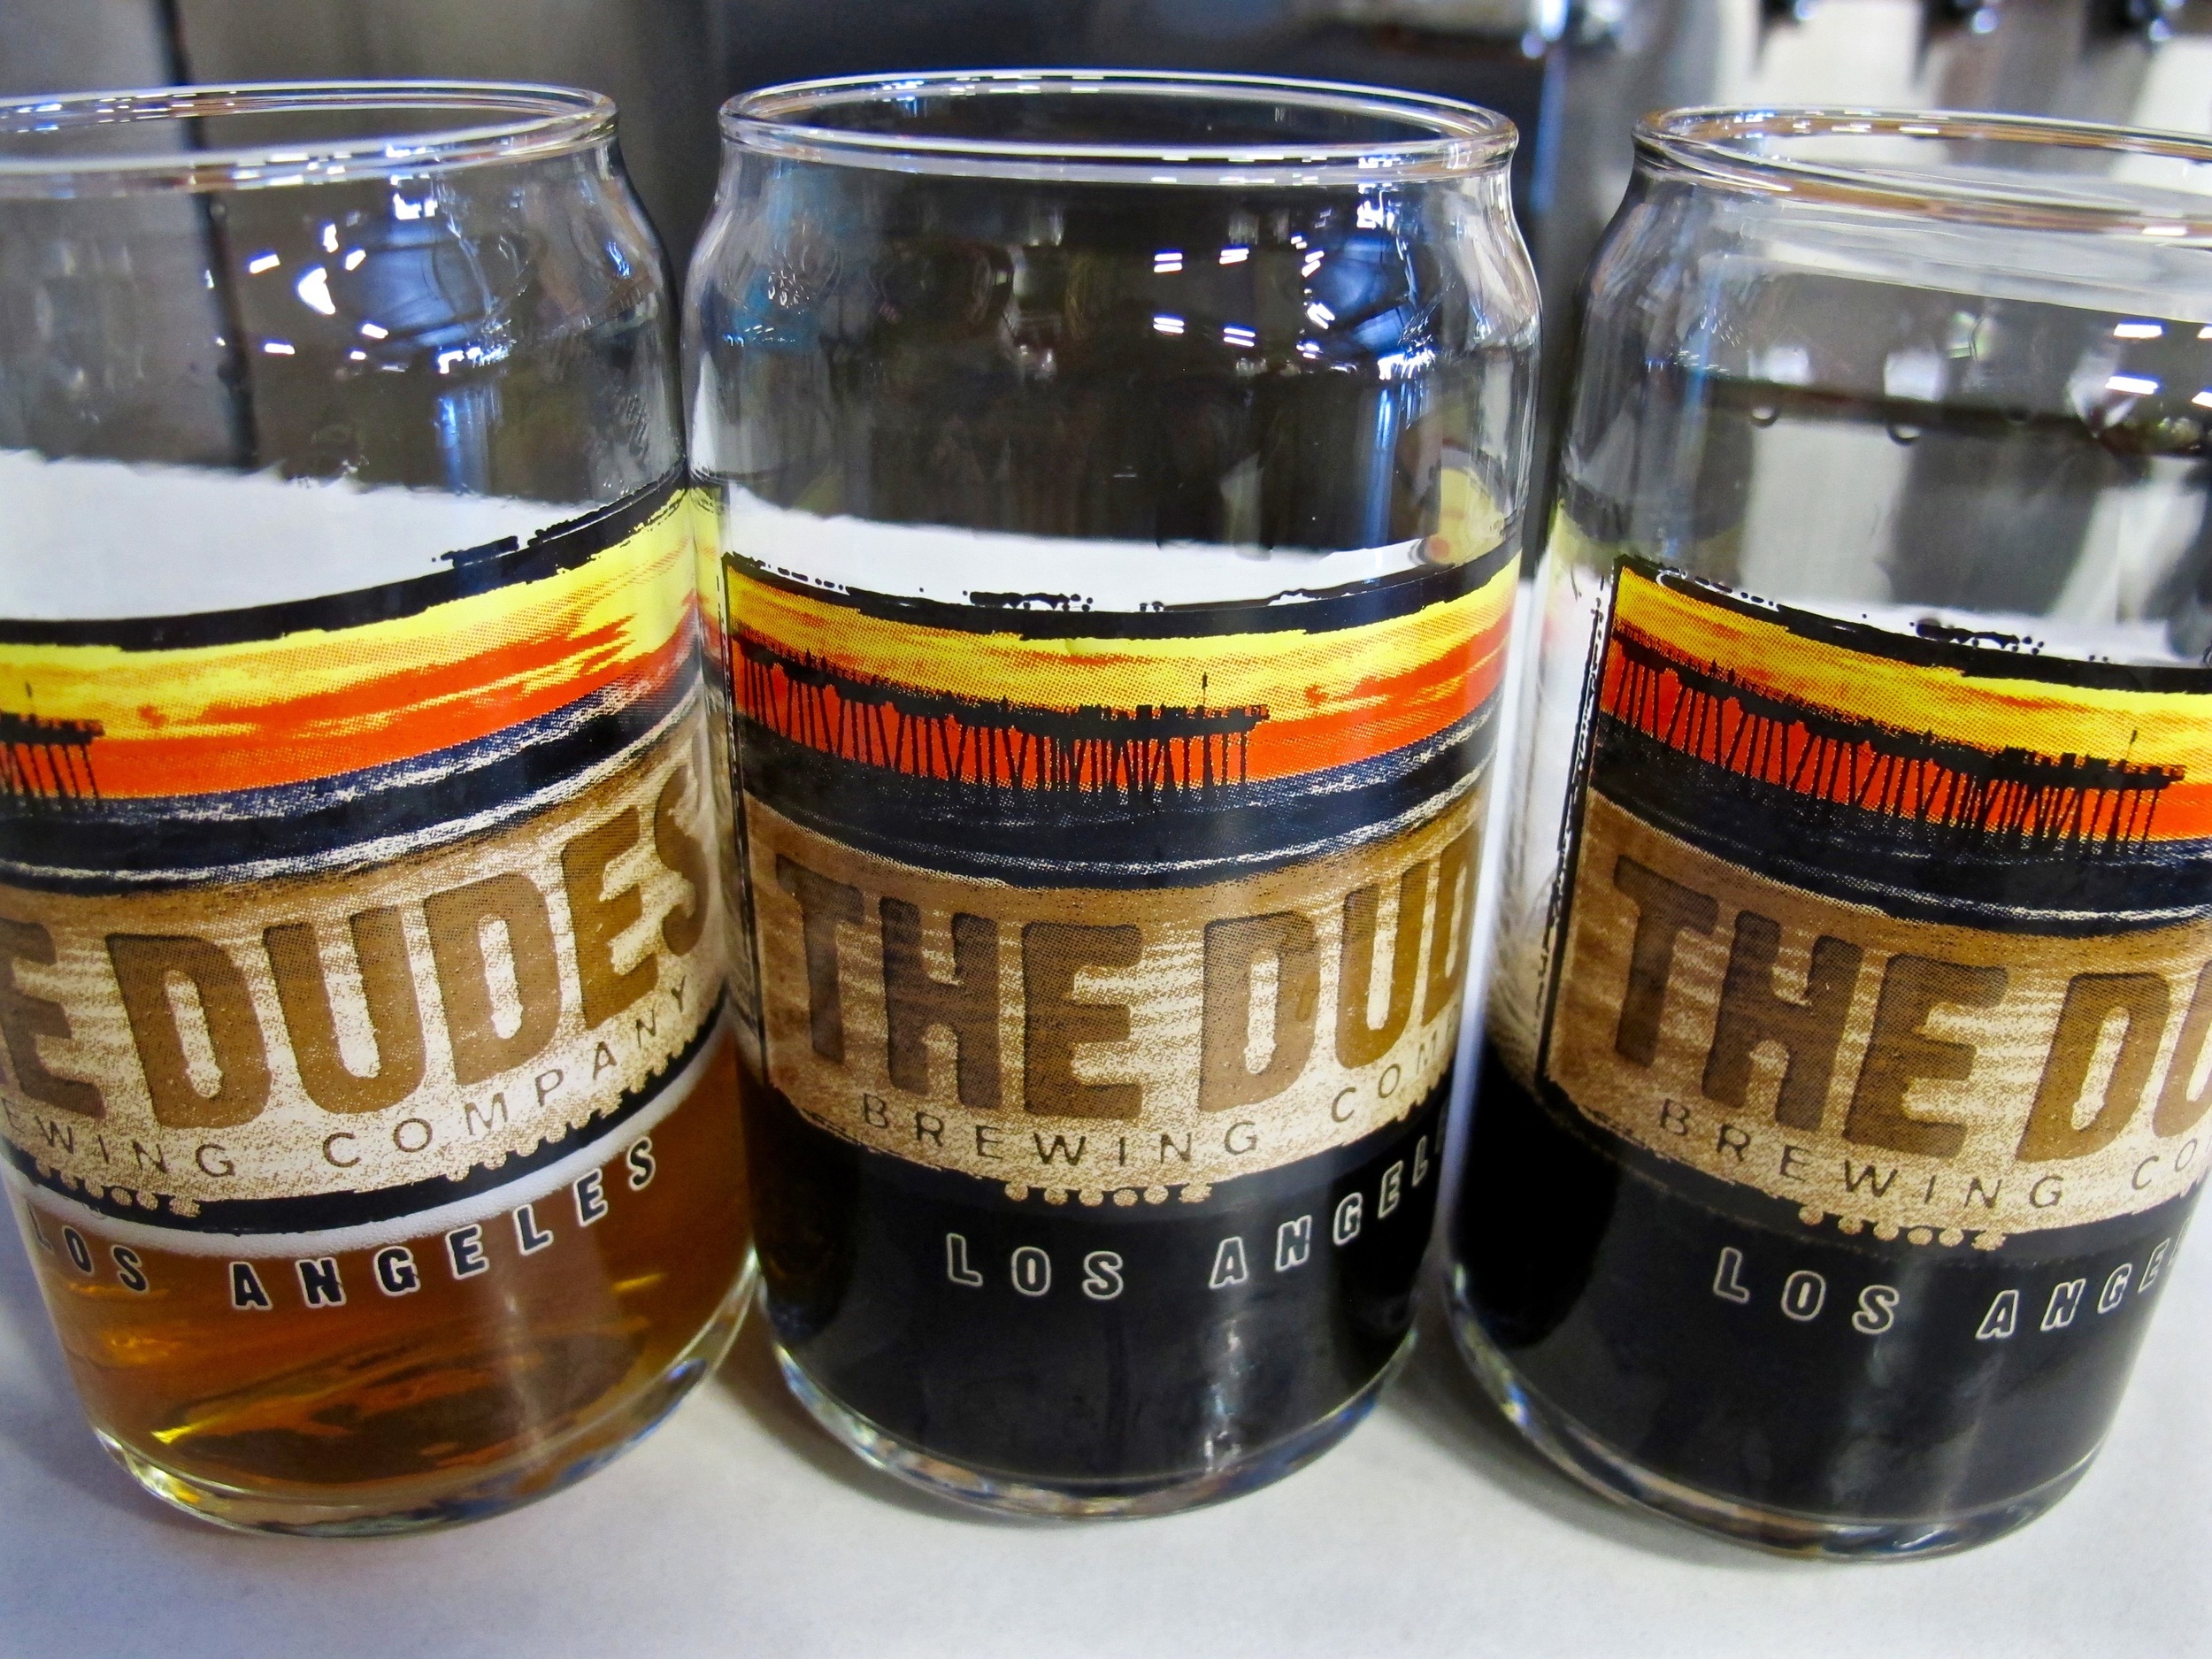 Torrance Breweries - The Dudes